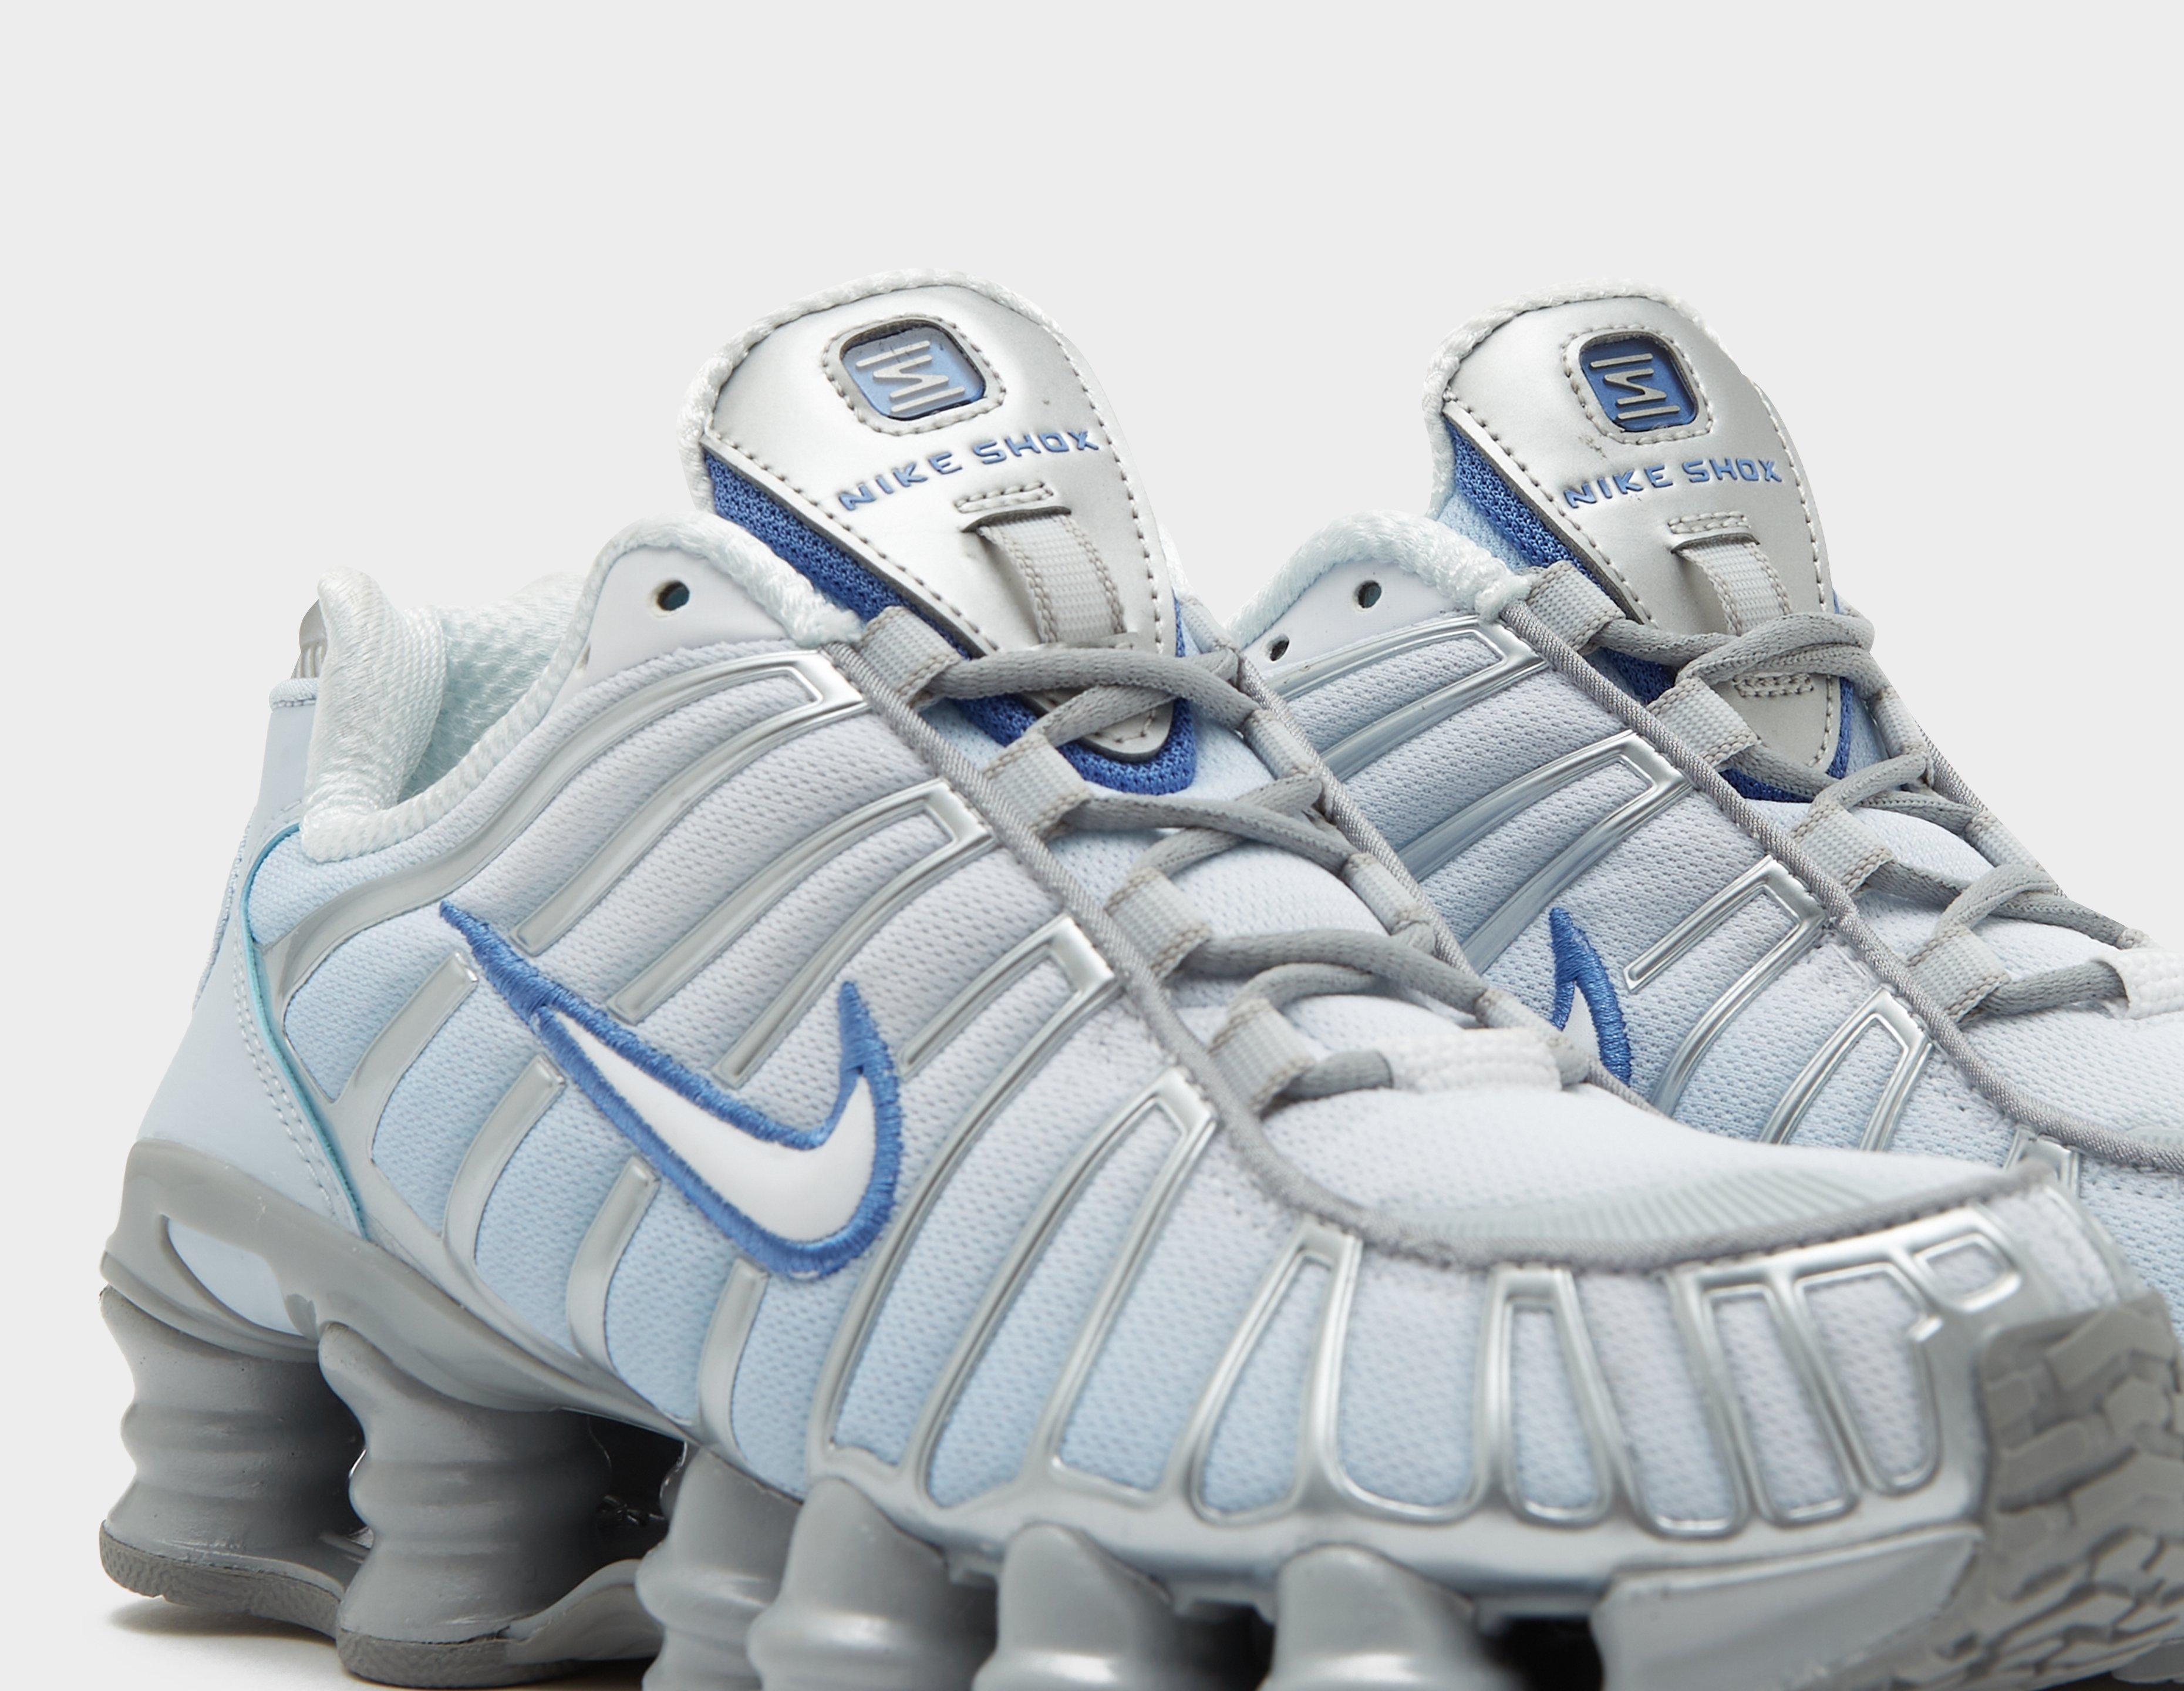 Nike Shox TL, review and details, From £ 155.00